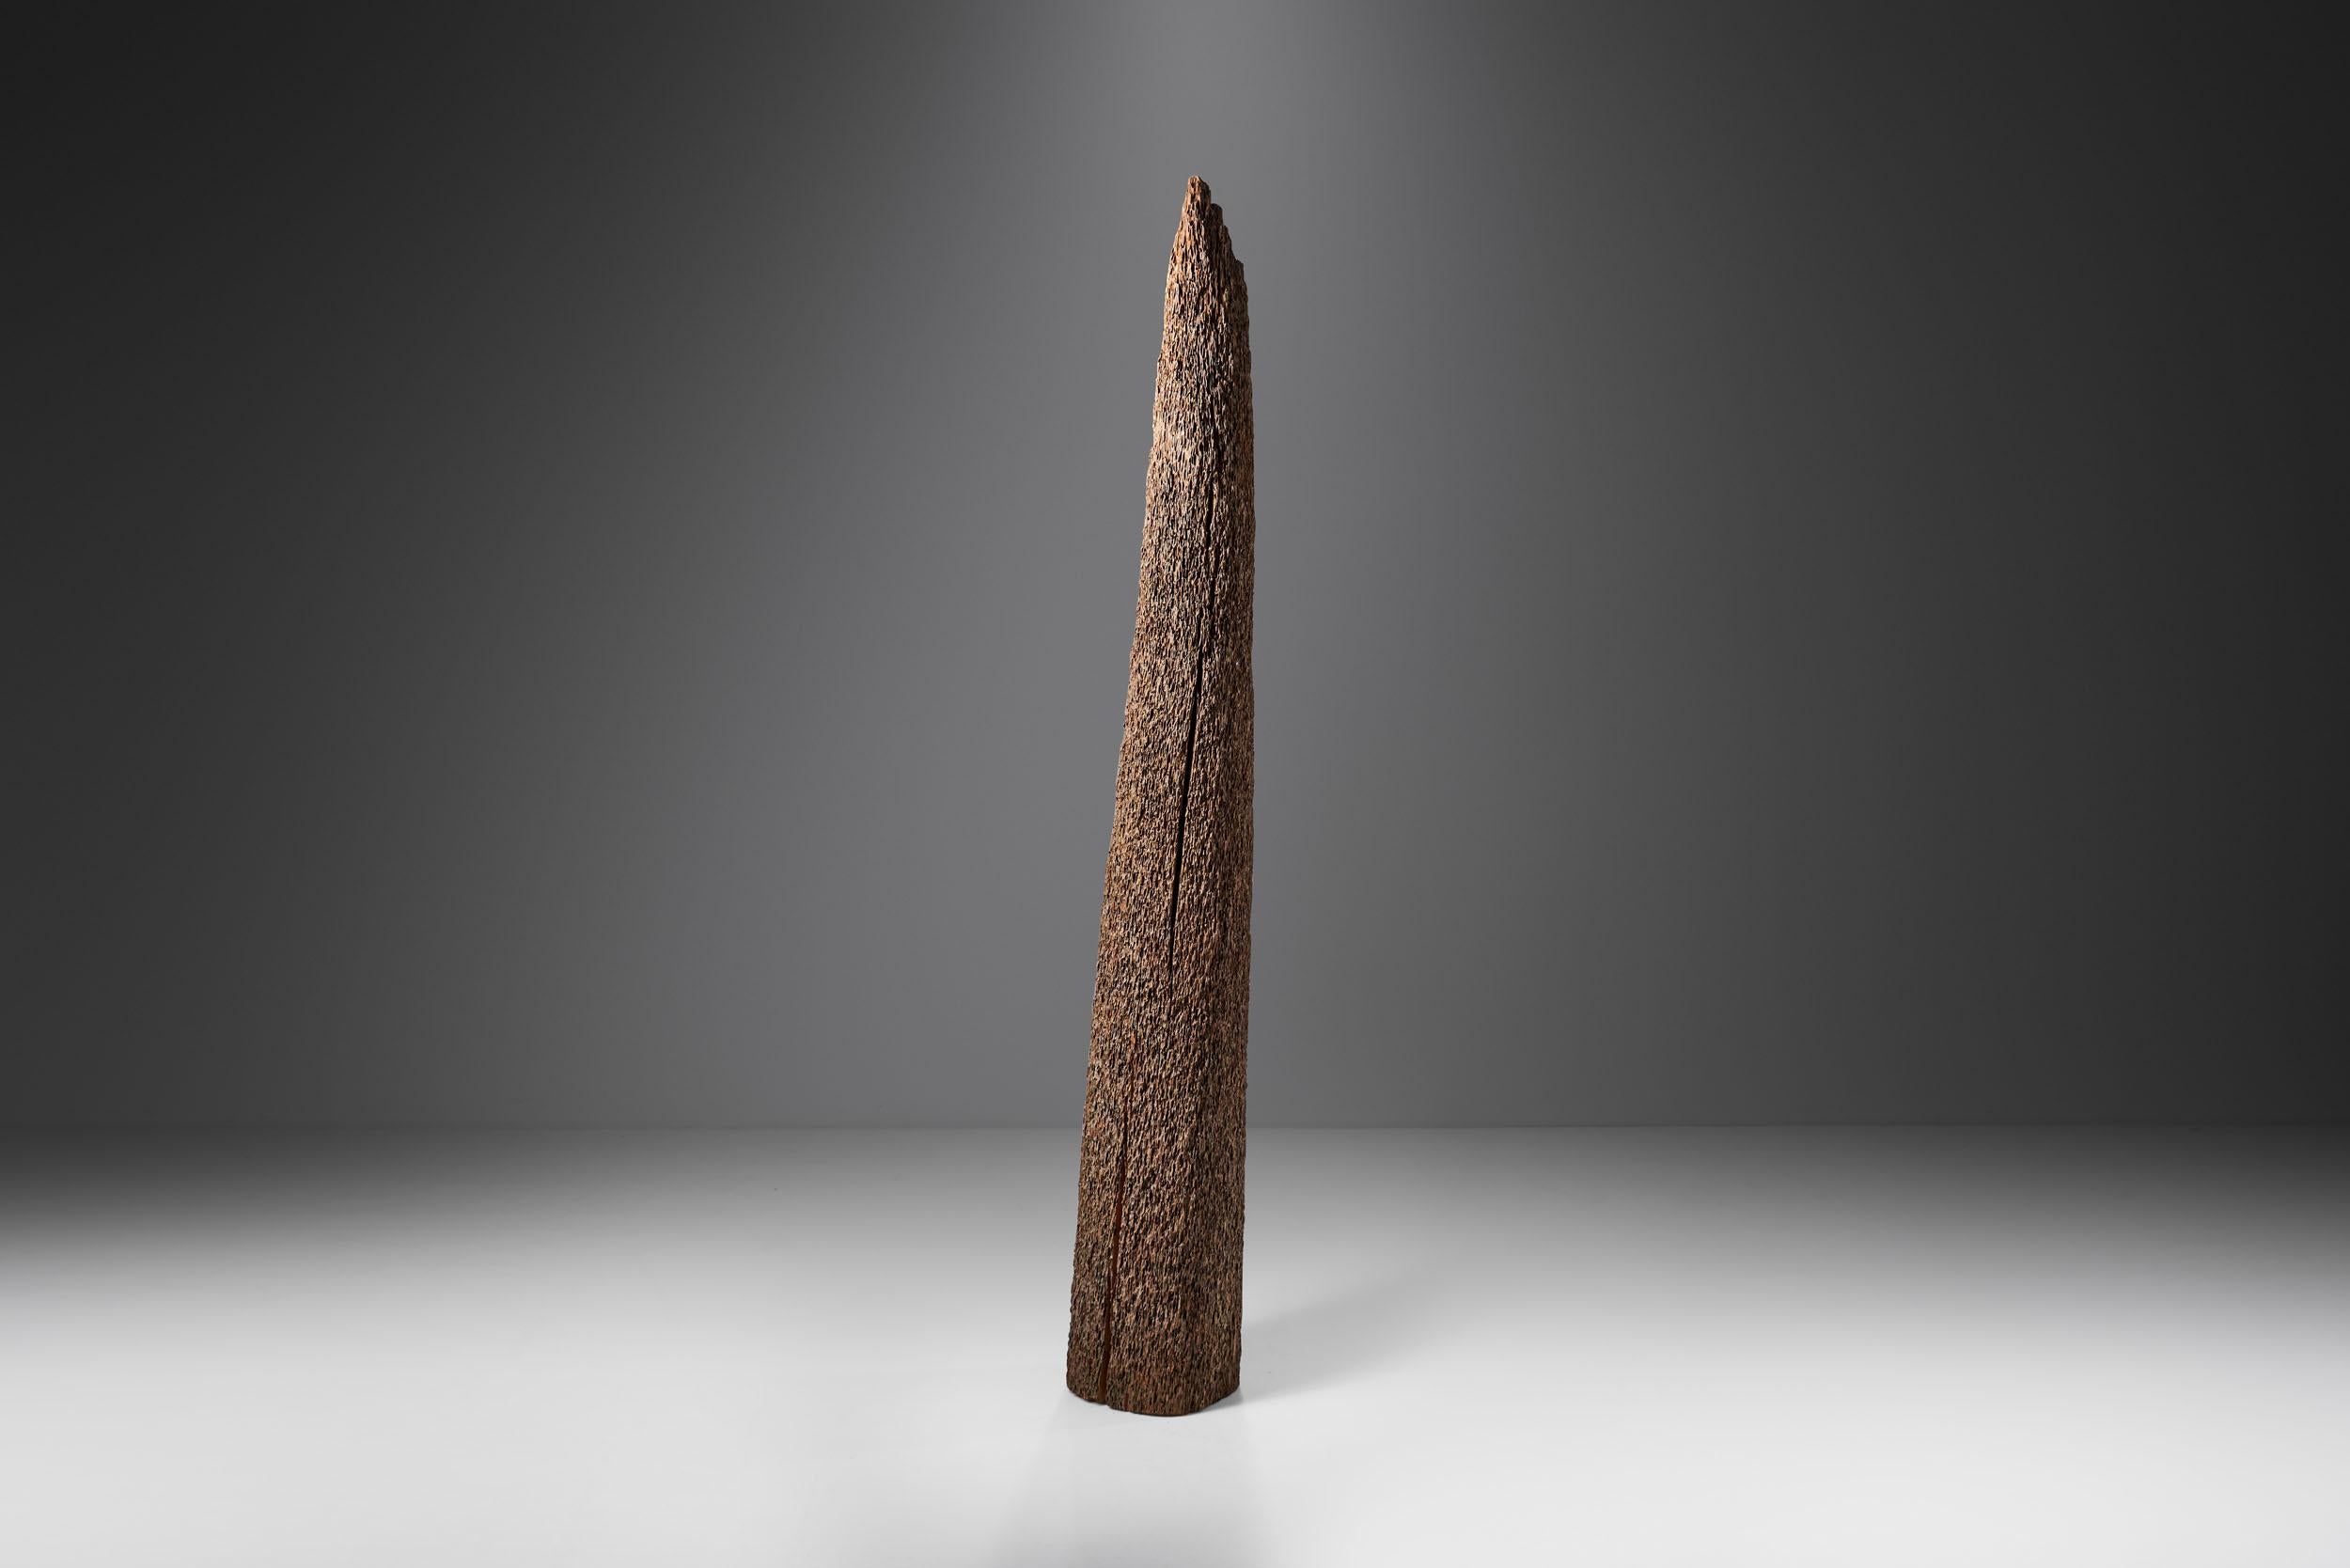 Nature has been a source of inspiration for artists, craftsmen, and to people of all trades since the dawn of time. This spike-shaped sculptural creation is ideal to bring a piece of ‘naturalia’ into any space to marvel at the “art” of nature.